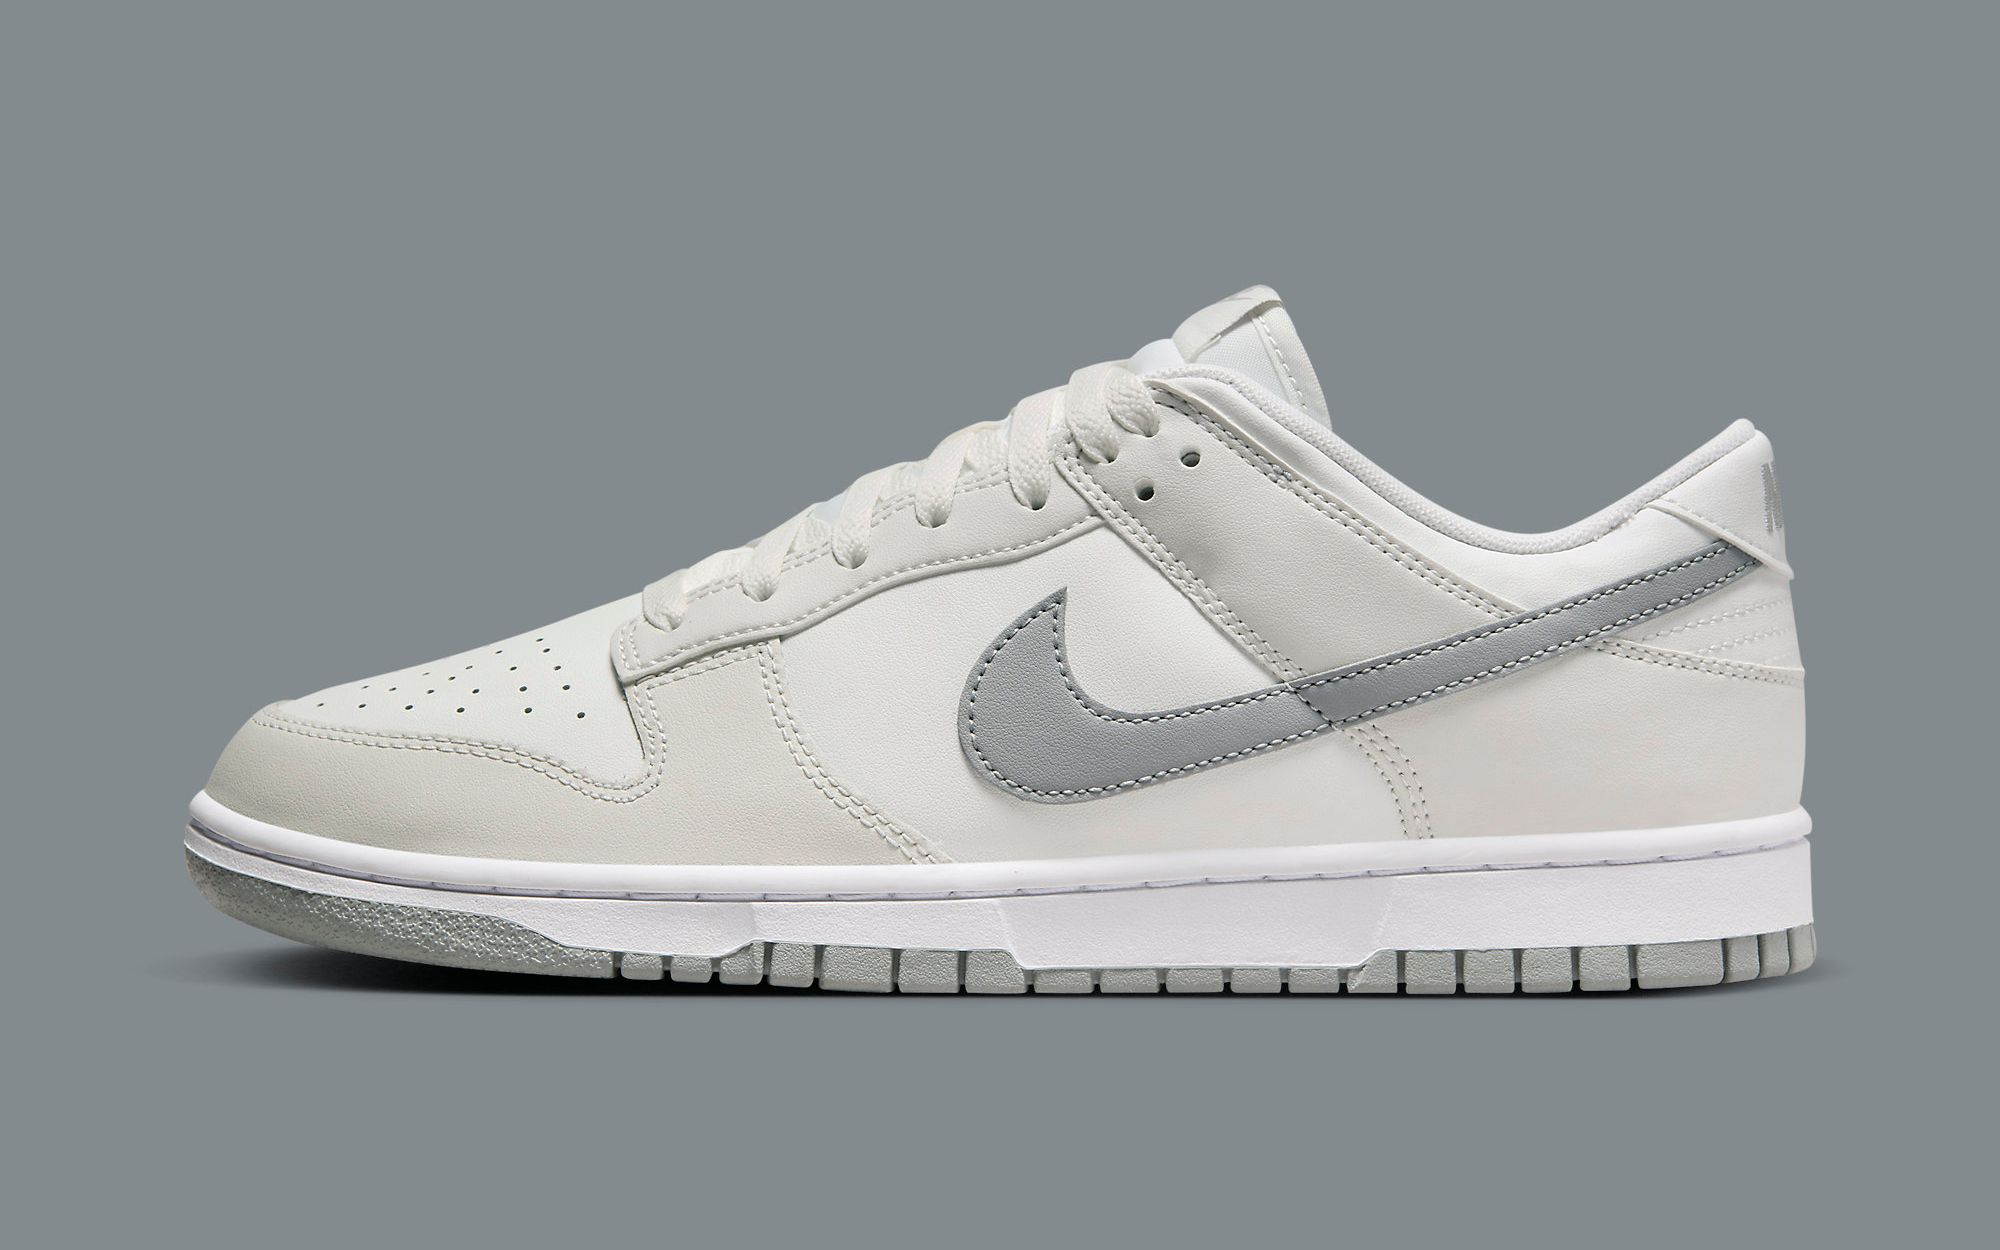 The Nike Dunk Low Surfaces in Summit White and Smoke Grey | House